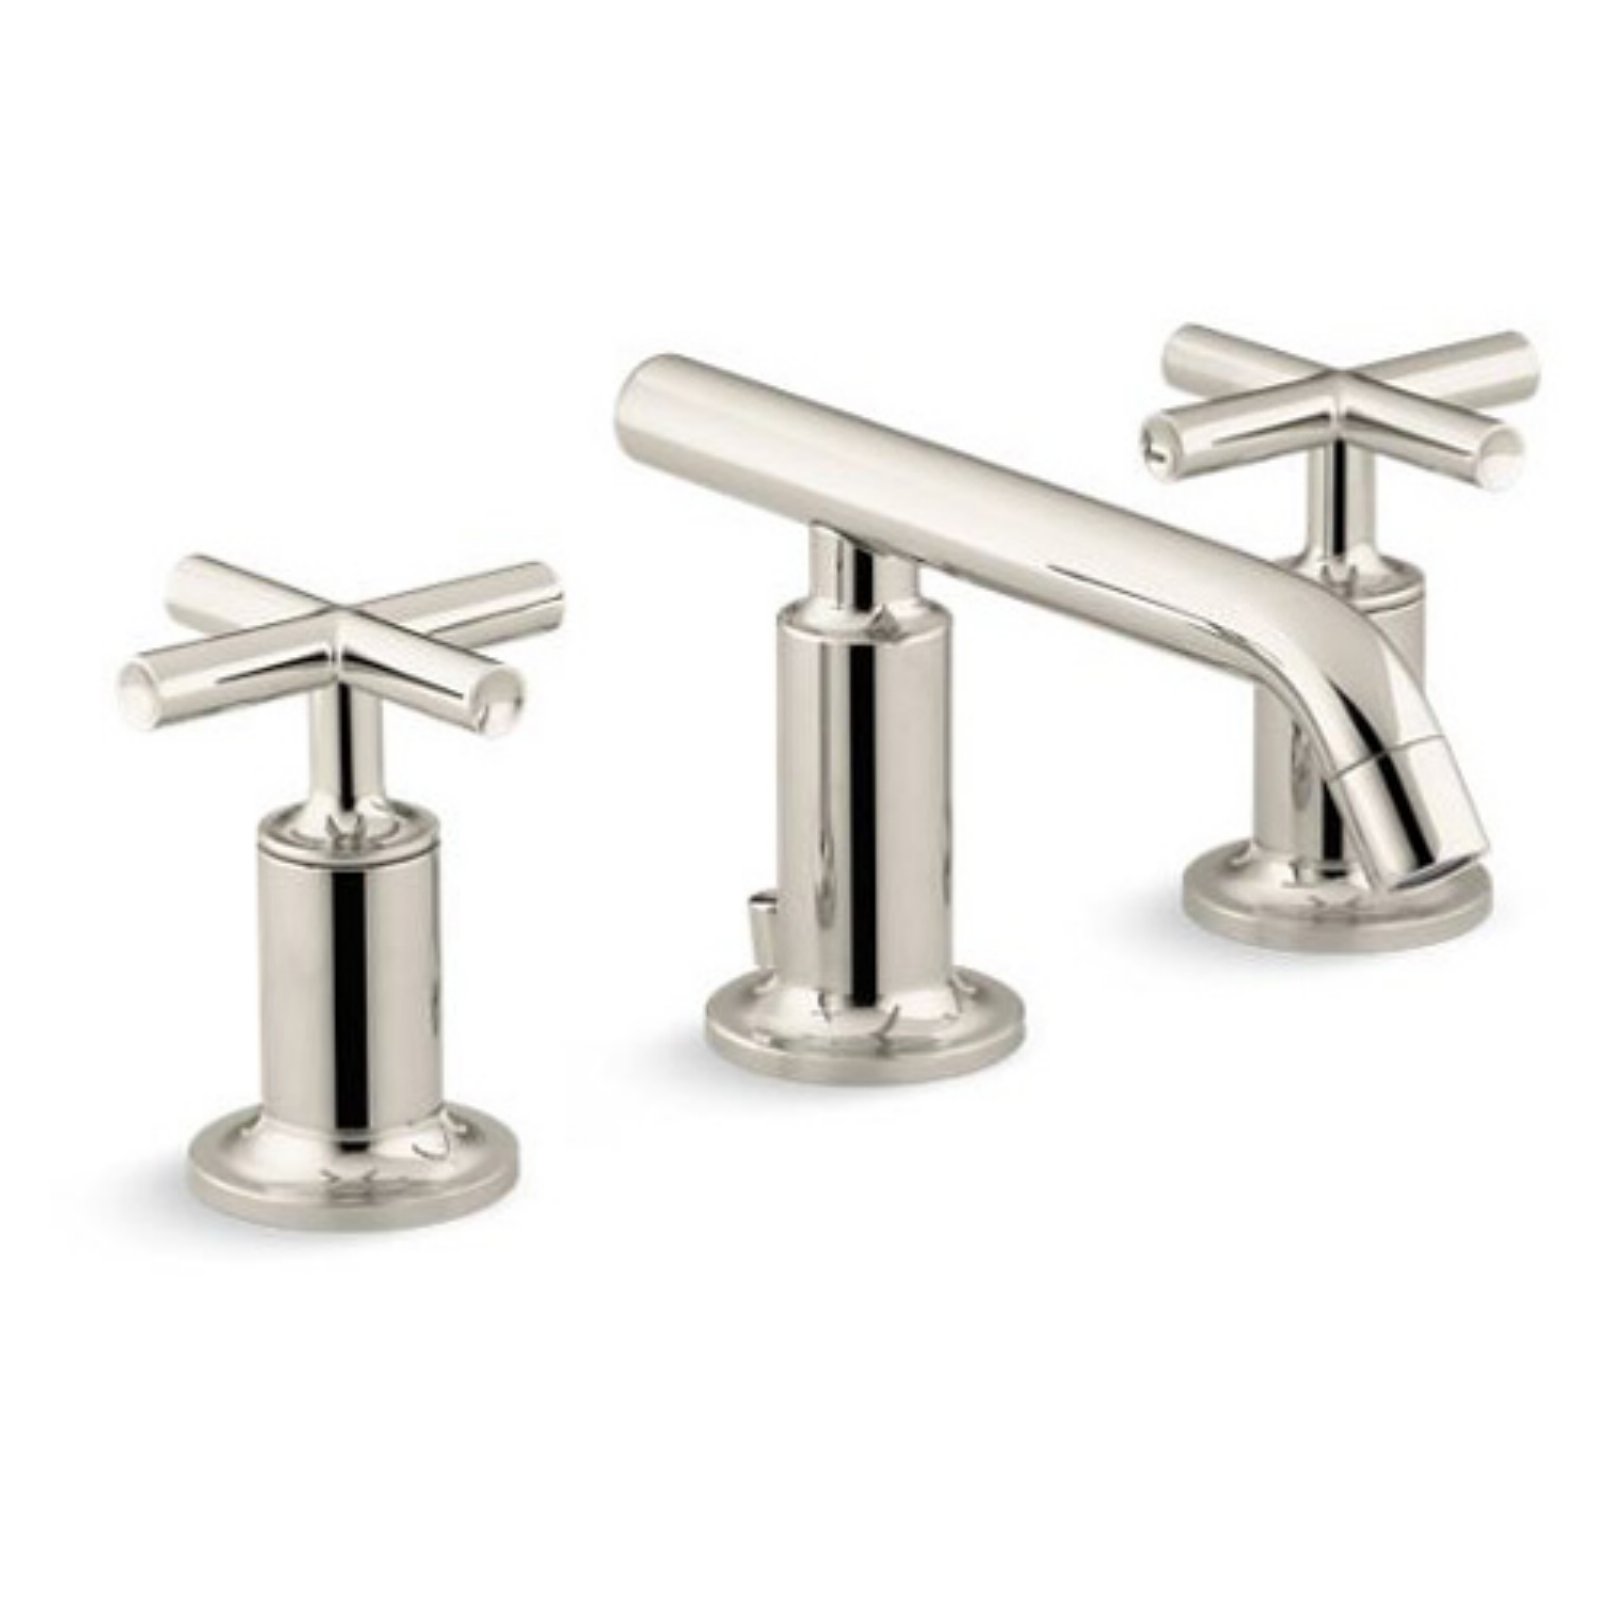 Kohler Purist Widespread Bathroom Sink Faucet with Low Cross Handles and  Spout